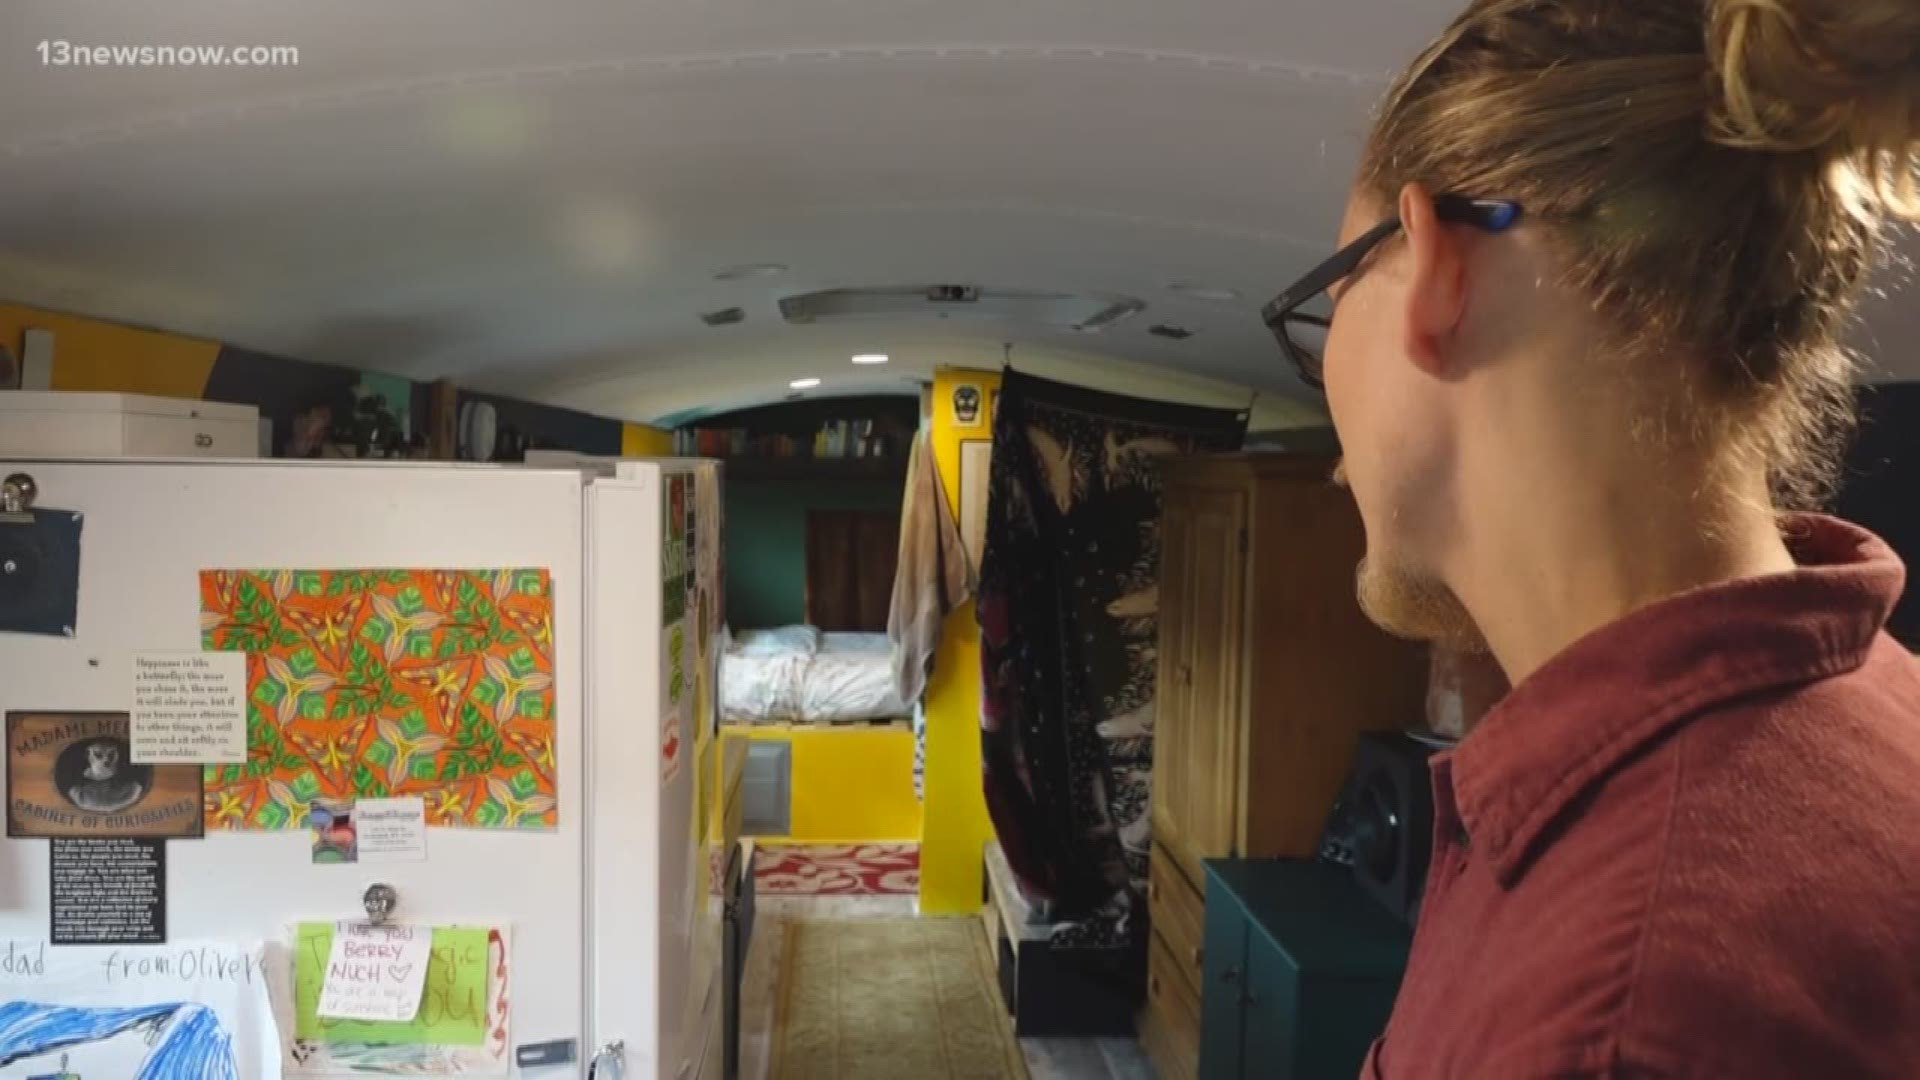 Kelly Kruschel and David Drewry of Wakefield converted an old school bus into a home!